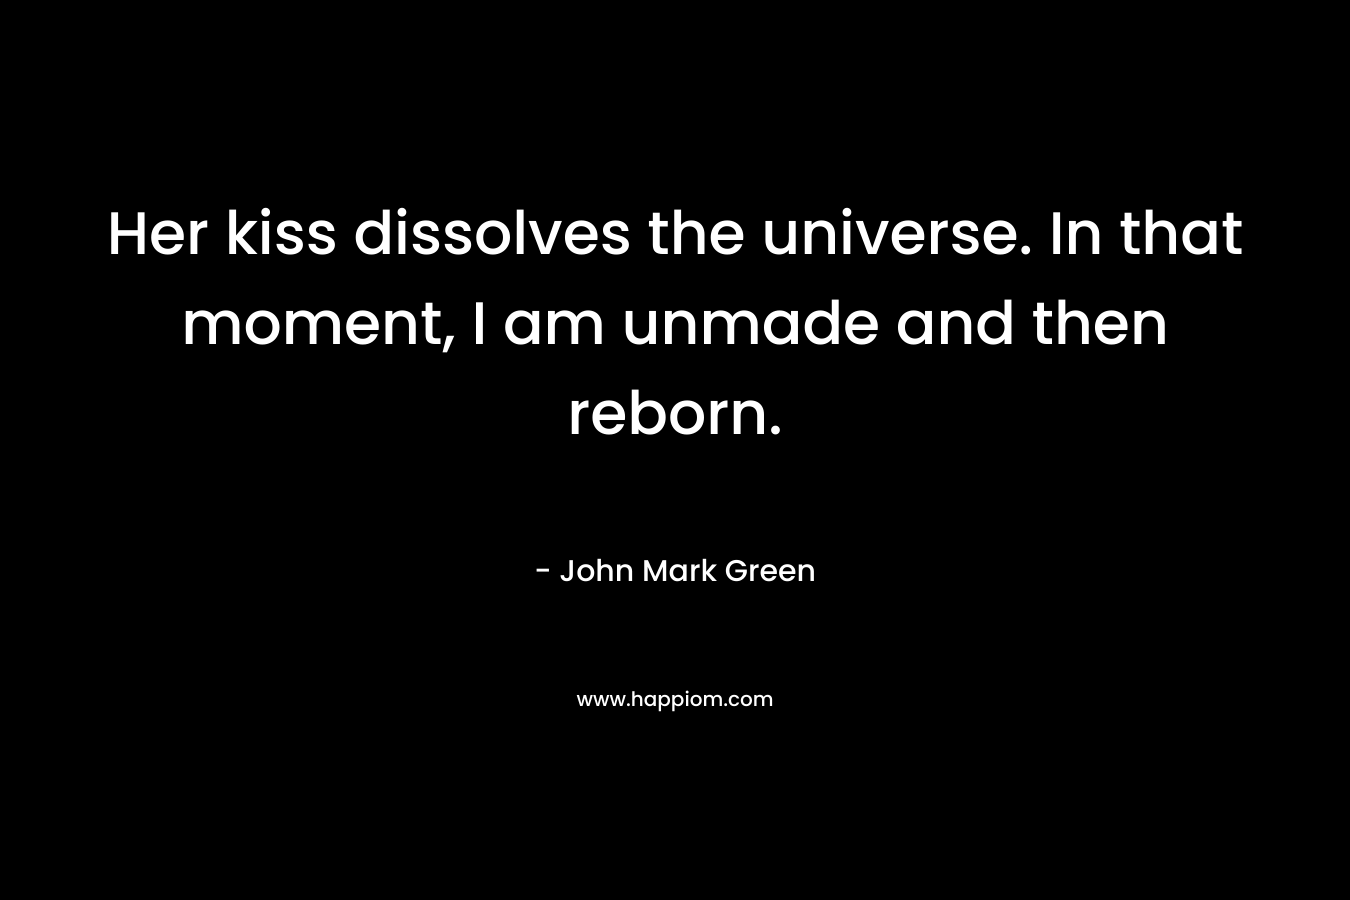 Her kiss dissolves the universe. In that moment, I am unmade and then reborn.